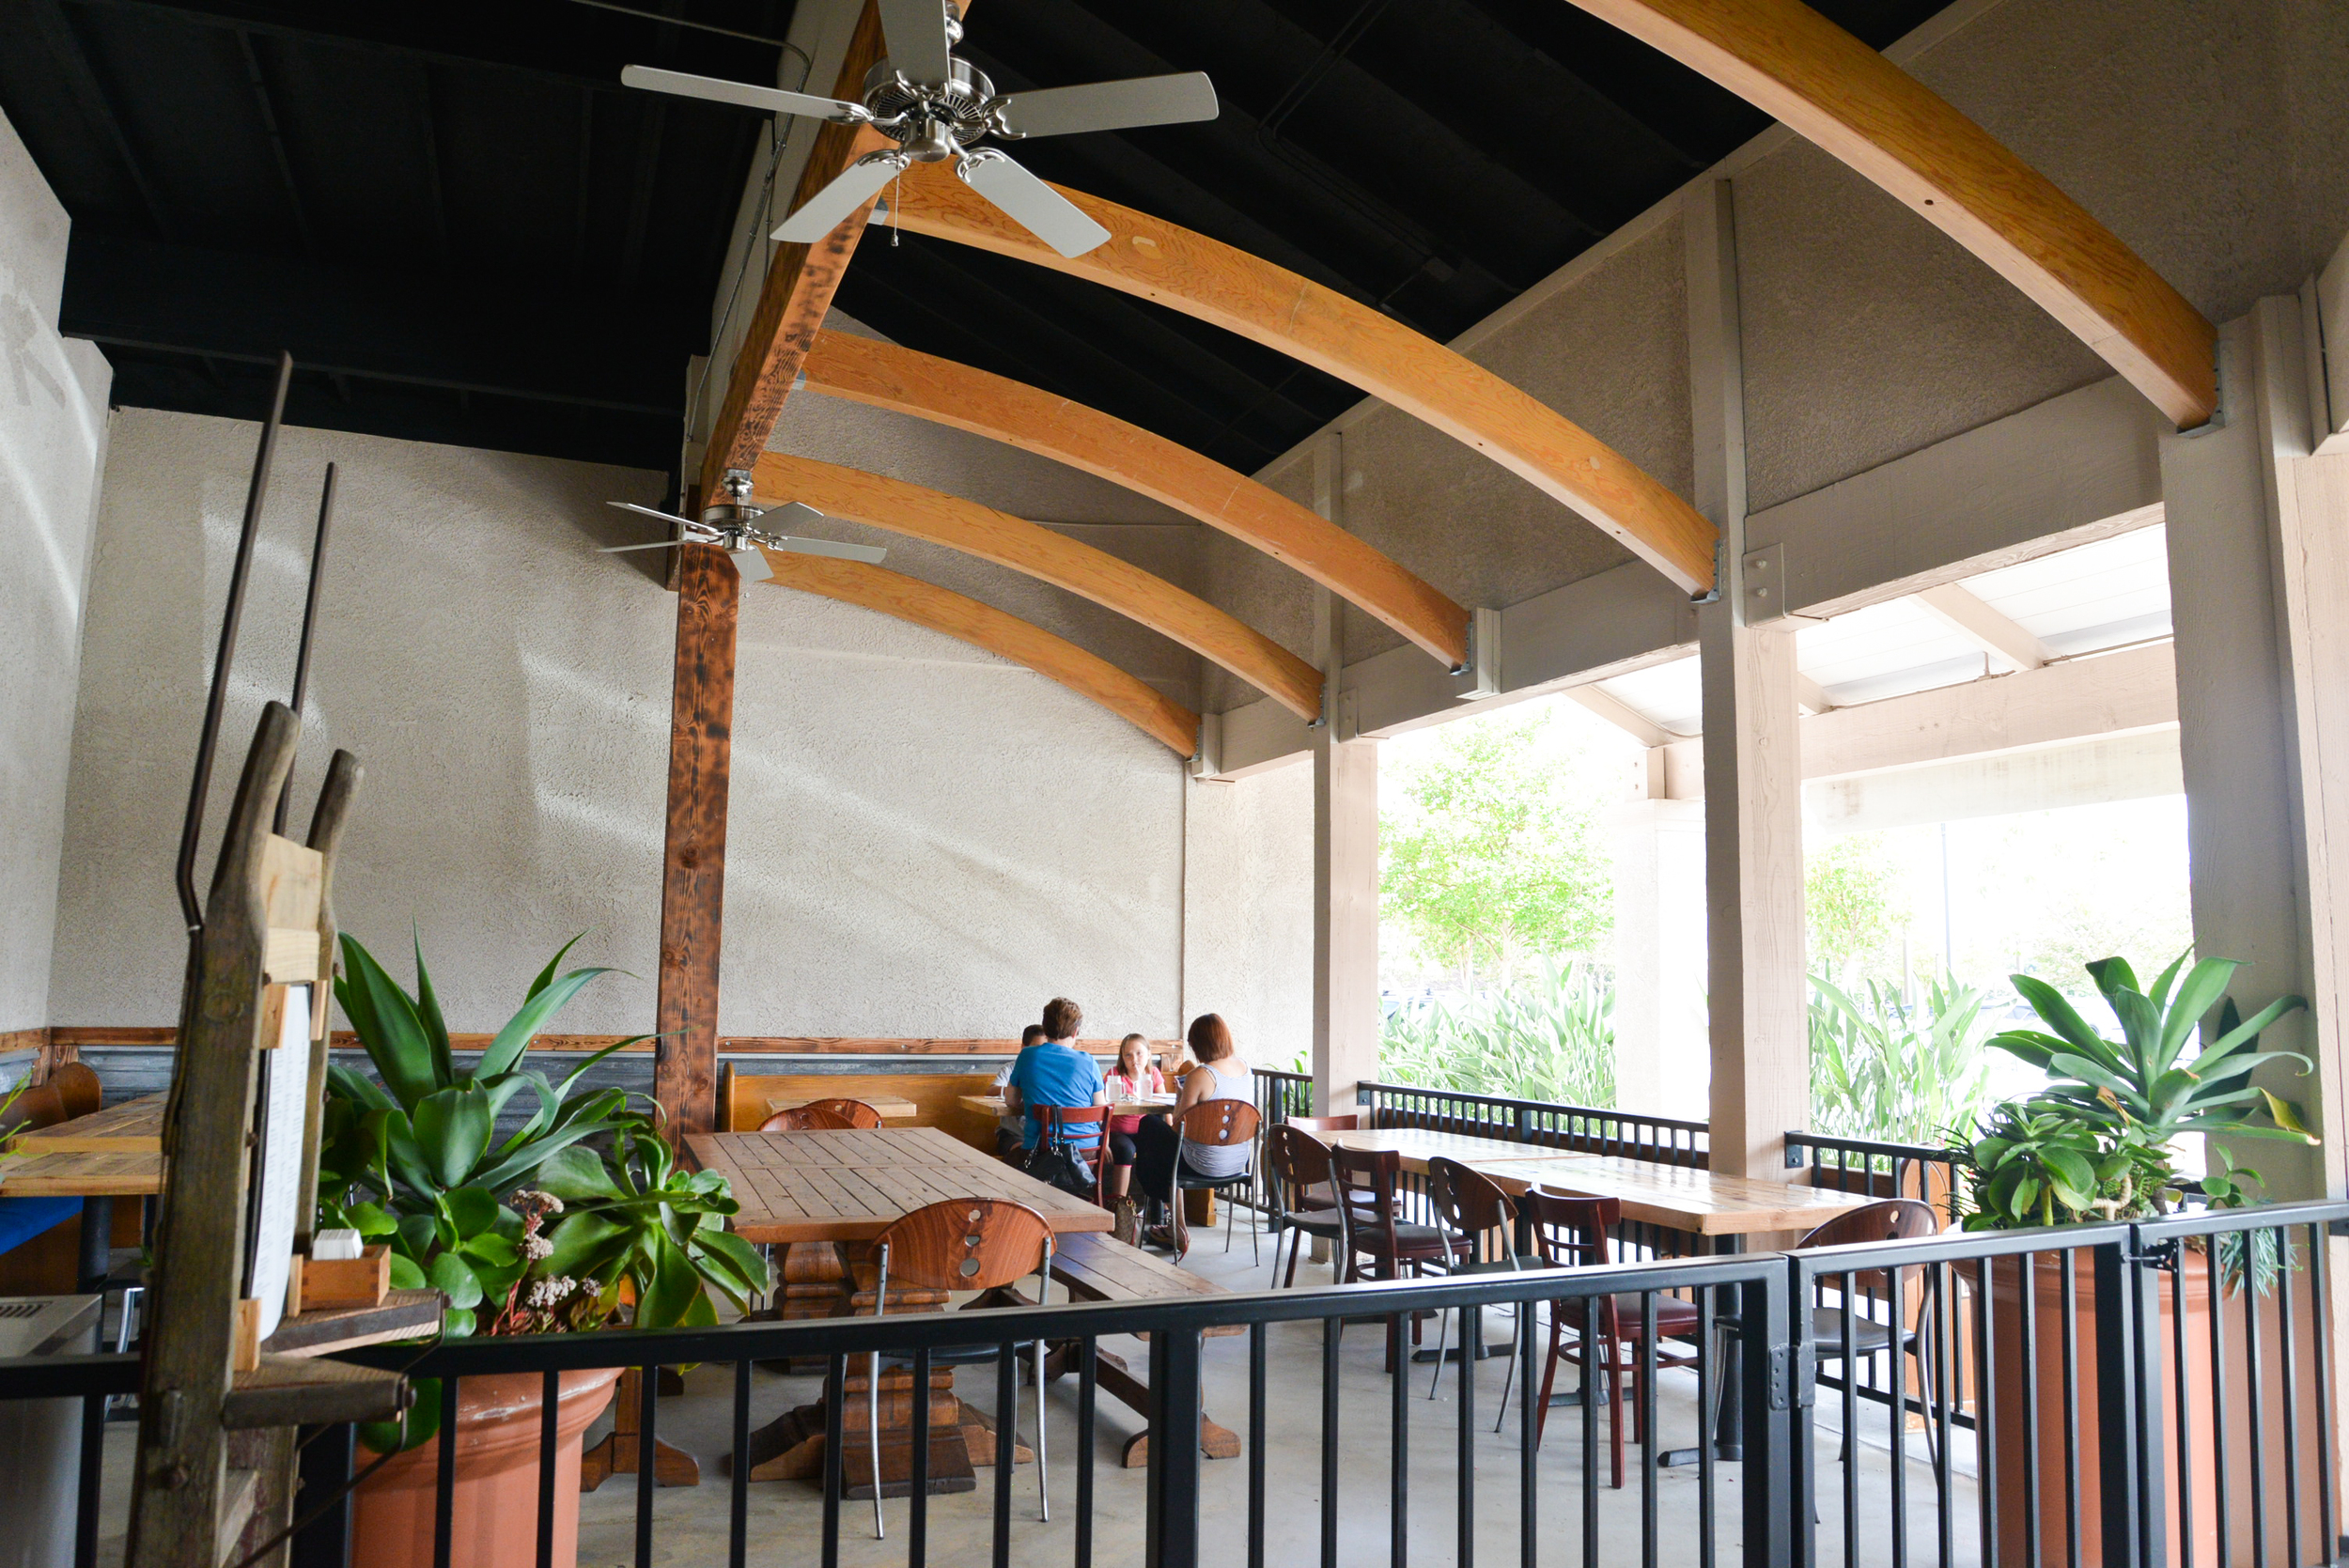   Break of Dawn's new expanded patio in Laguna Hills. The restaurant reopened in mid-June./ HEATHER GOLDIN, STAFF&nbsp;  